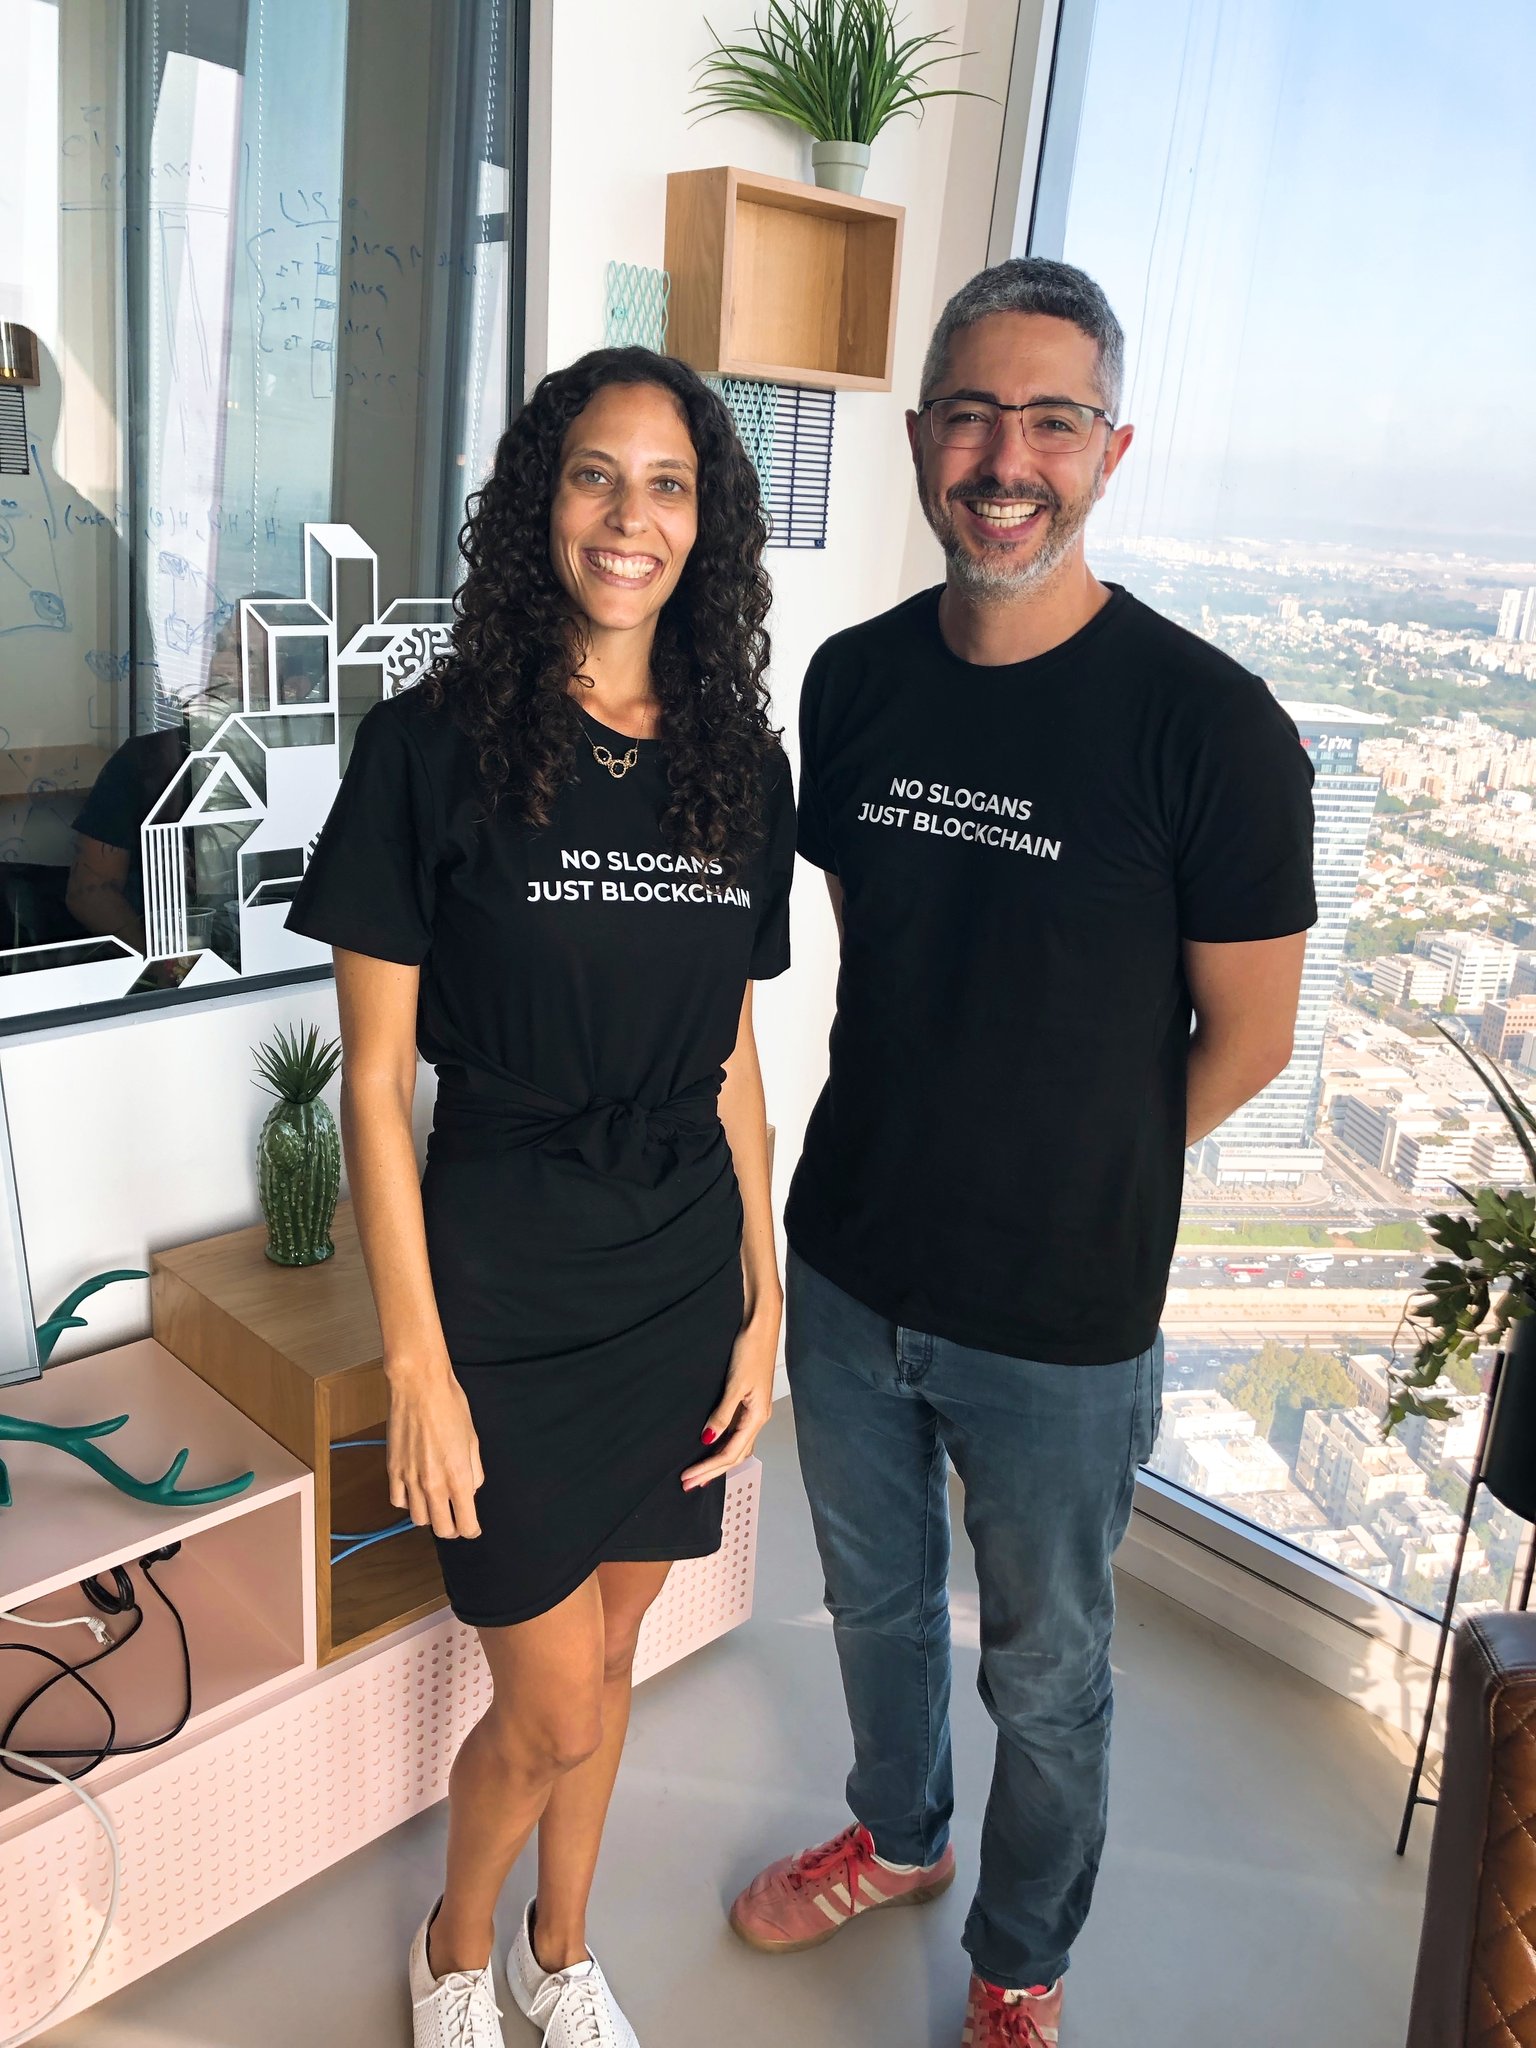 Forbes' Rachel Wolfson with Orbs Co-founder Tal Kol at Orbs HQ in Tel Aviv